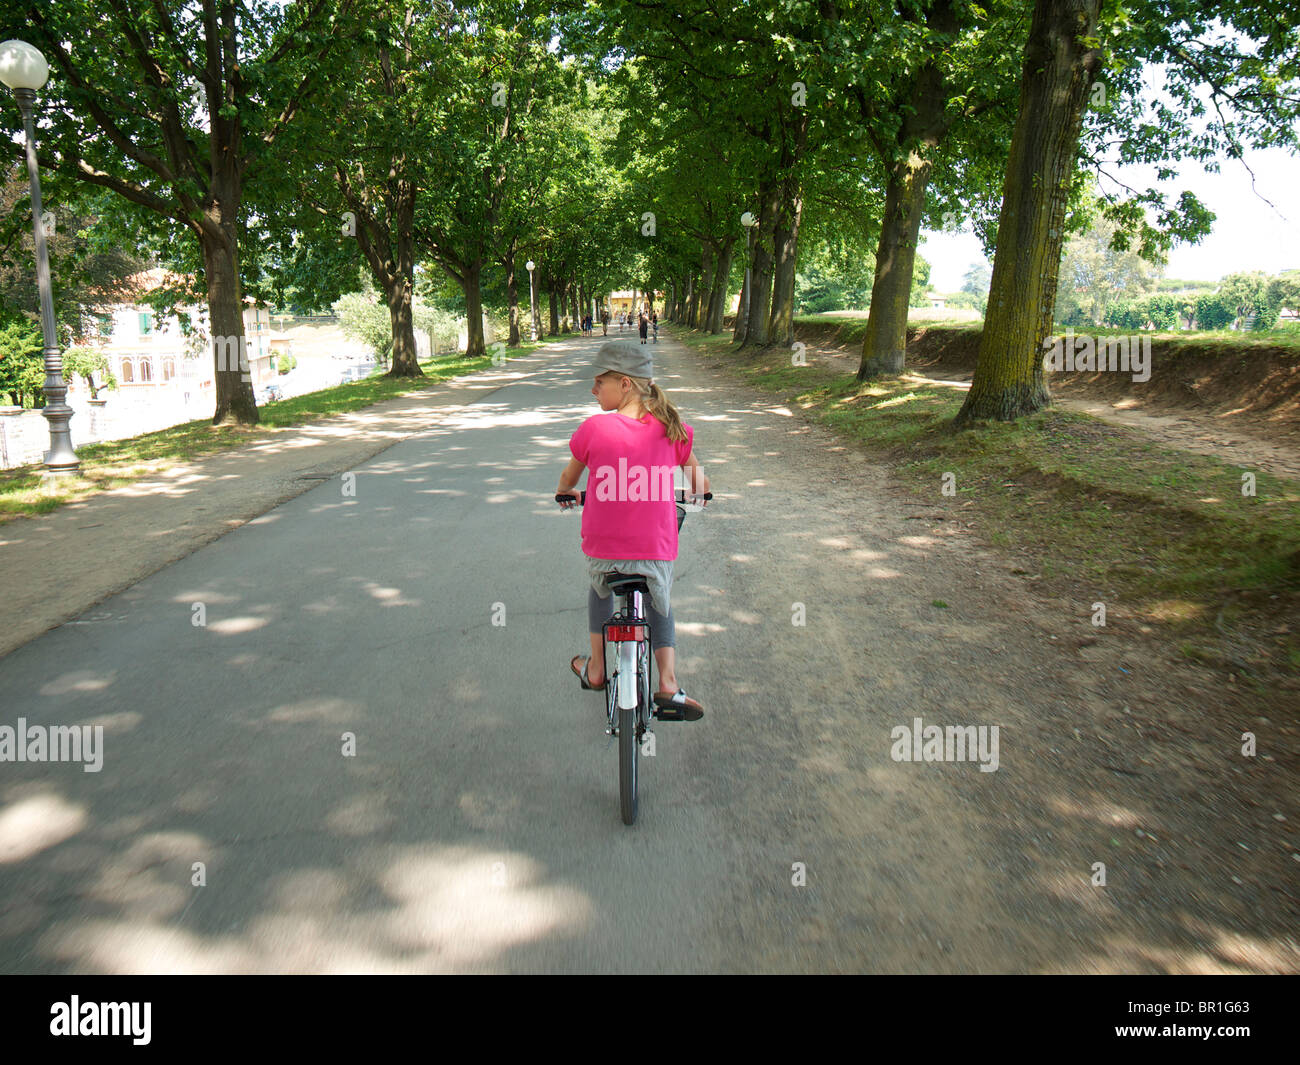 Cycling Lane Family City High Resolution Stock Photography and Images -  Alamy